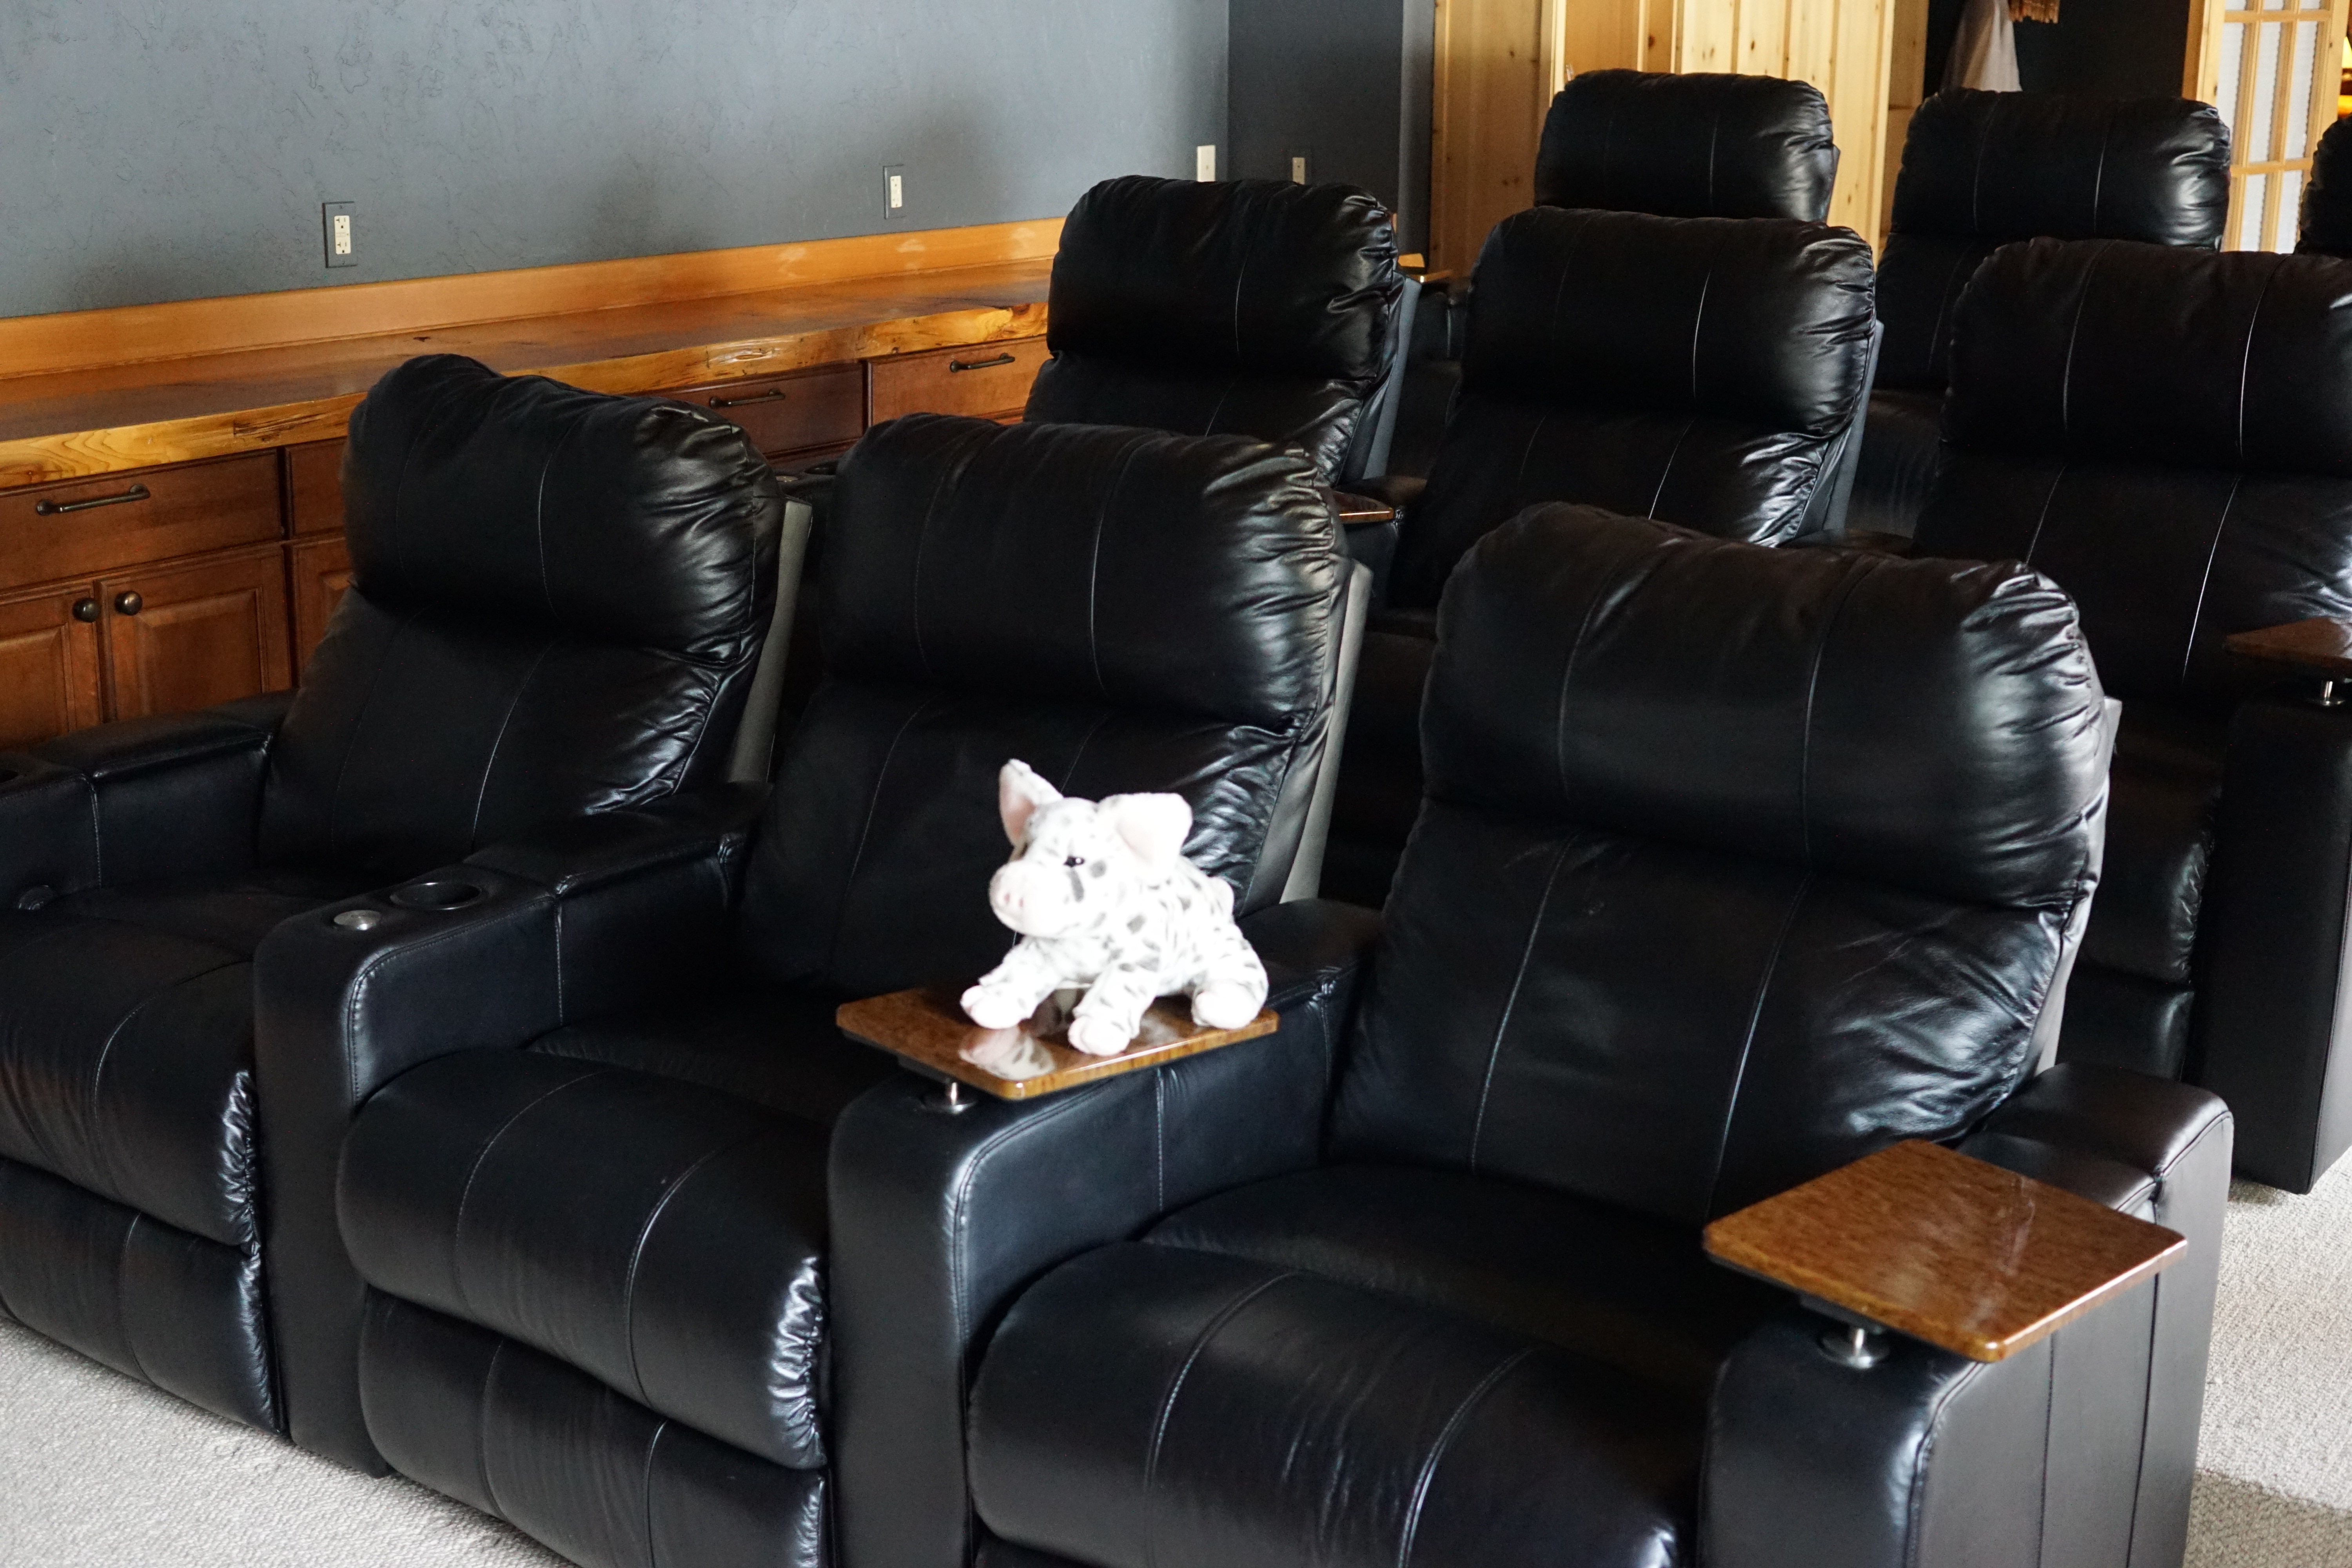 Grand river lodge theater room seating